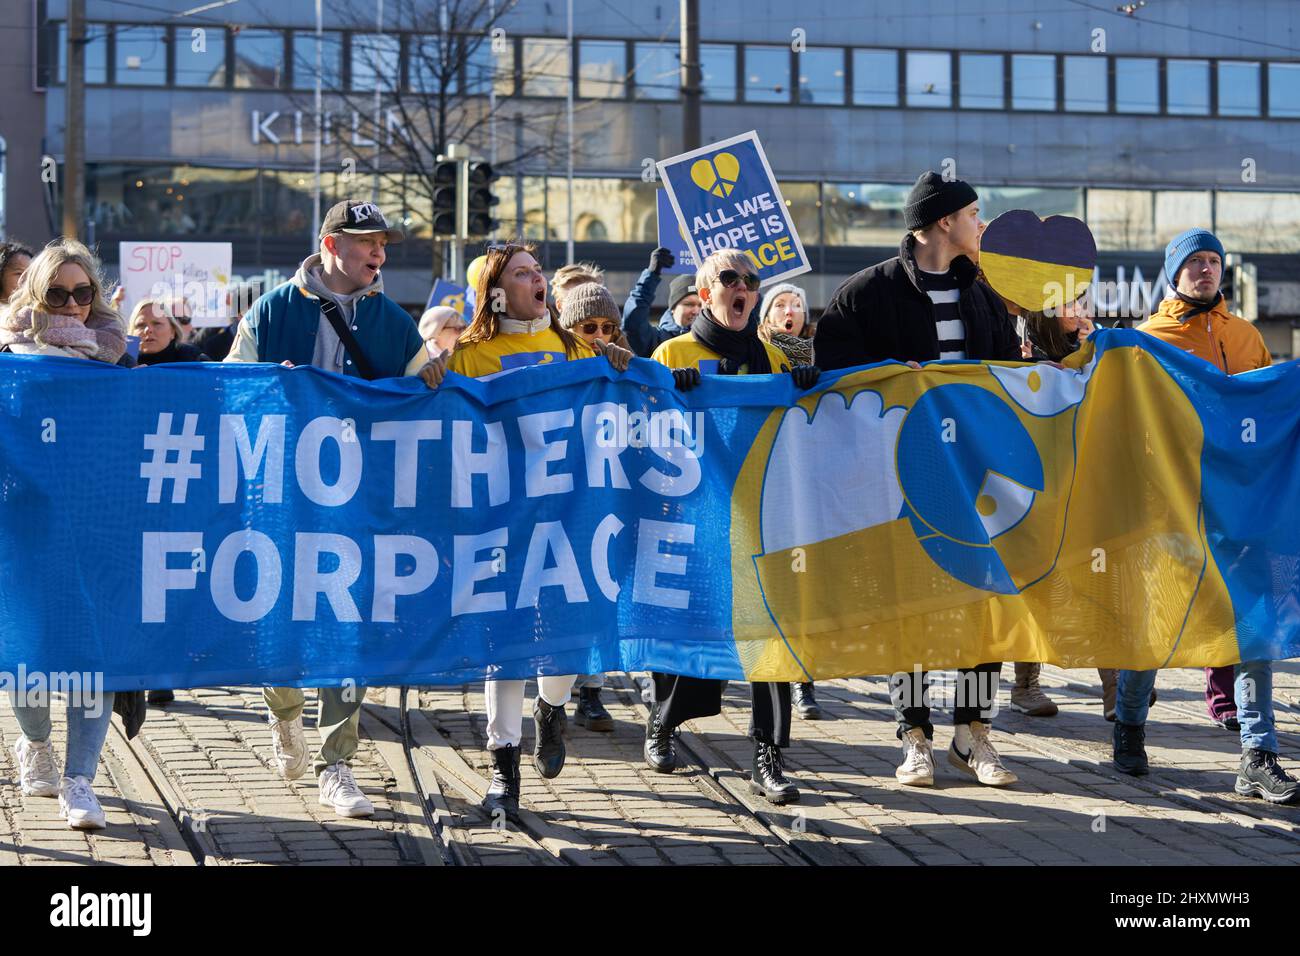 Helsinki, Finland - March 12, 2022: Demonstrators with a #mothersforpeace banner in a Mothers for Peace rally protesting Russia’s military aggression Stock Photo